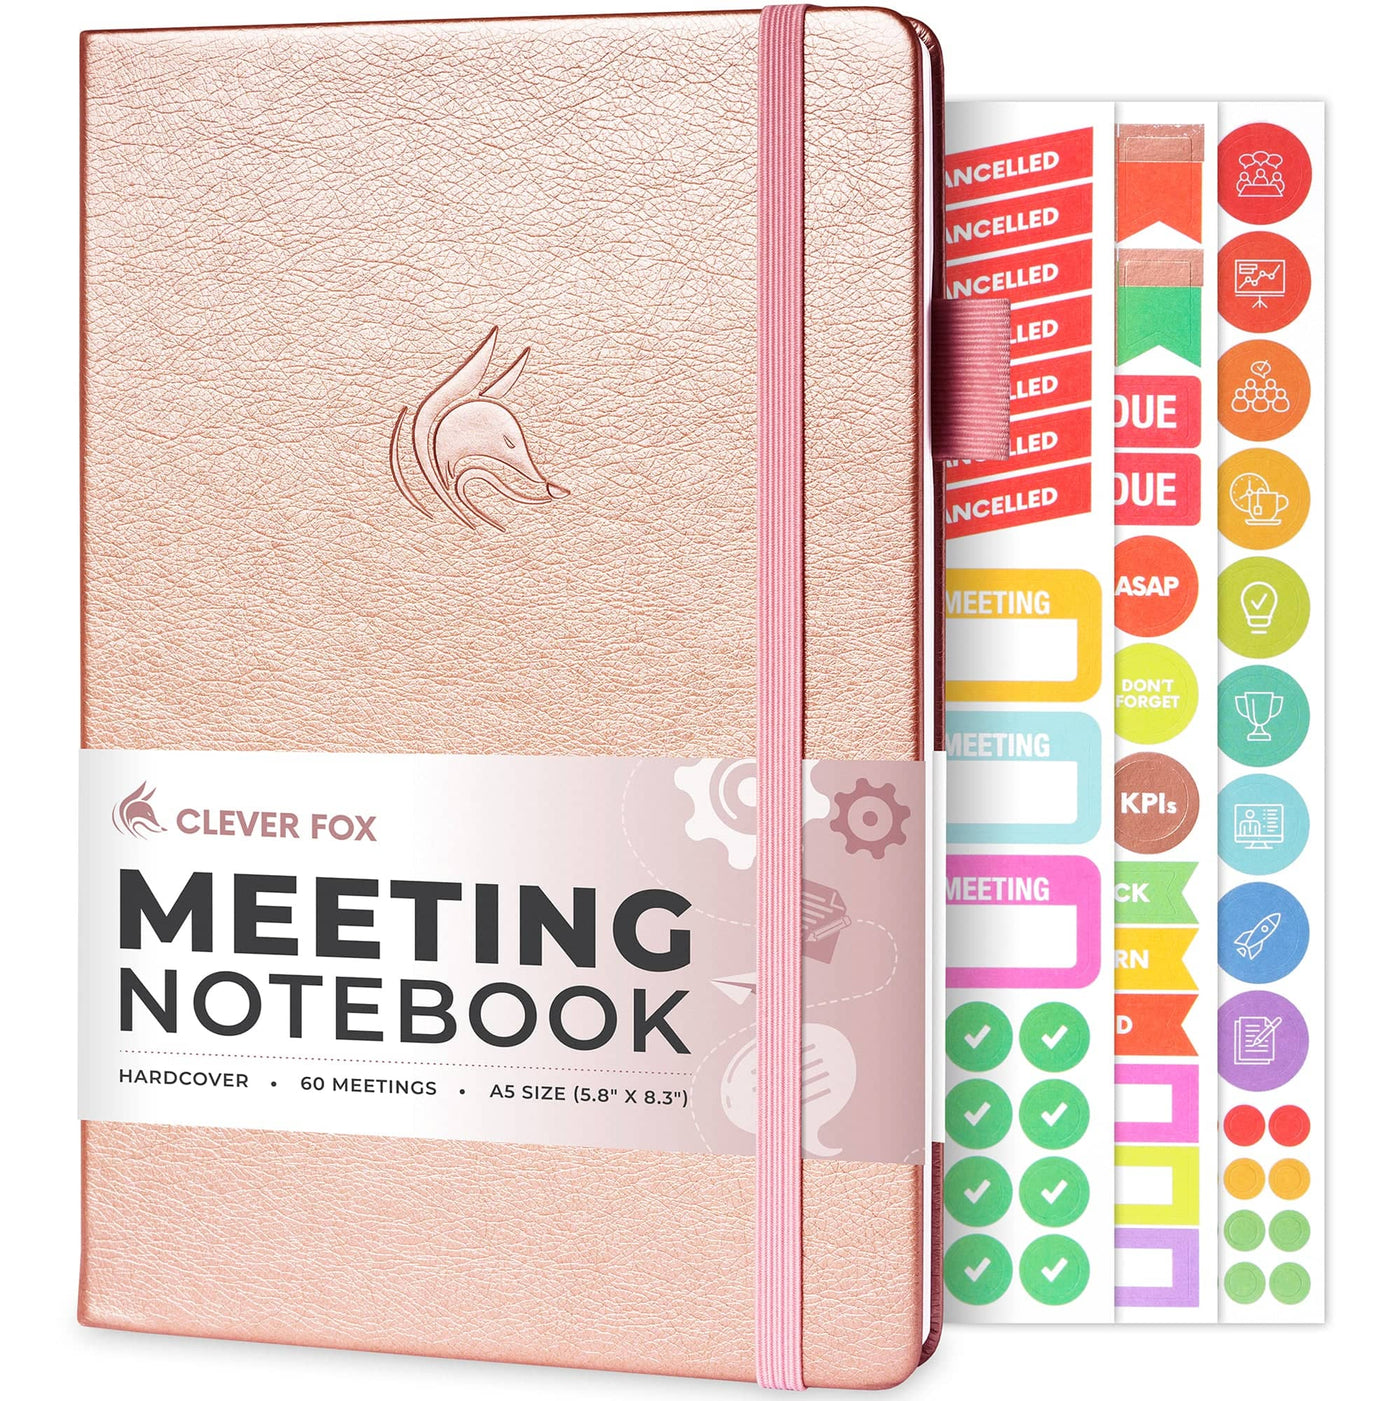 HUSTLE Co. Meeting Notebook for Work with Action Items Clever Hardcover  Journal for More Productive Meetings - Index, 160 Pages, 100gsm Paper, Lays